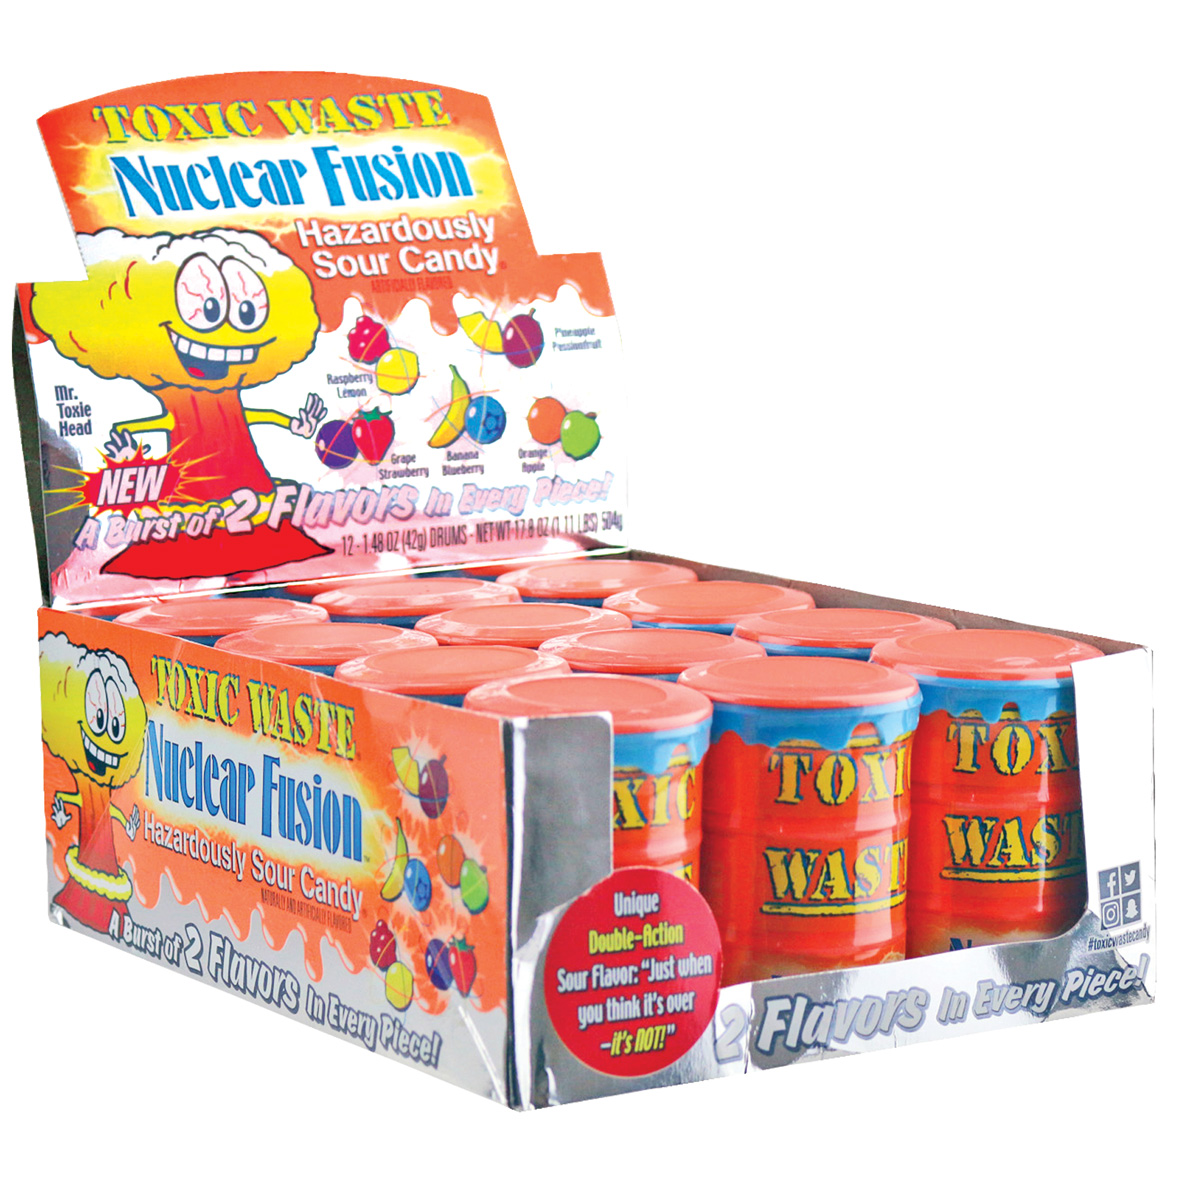 Toxic Waste Sour Candy Drums: 12-Piece Display